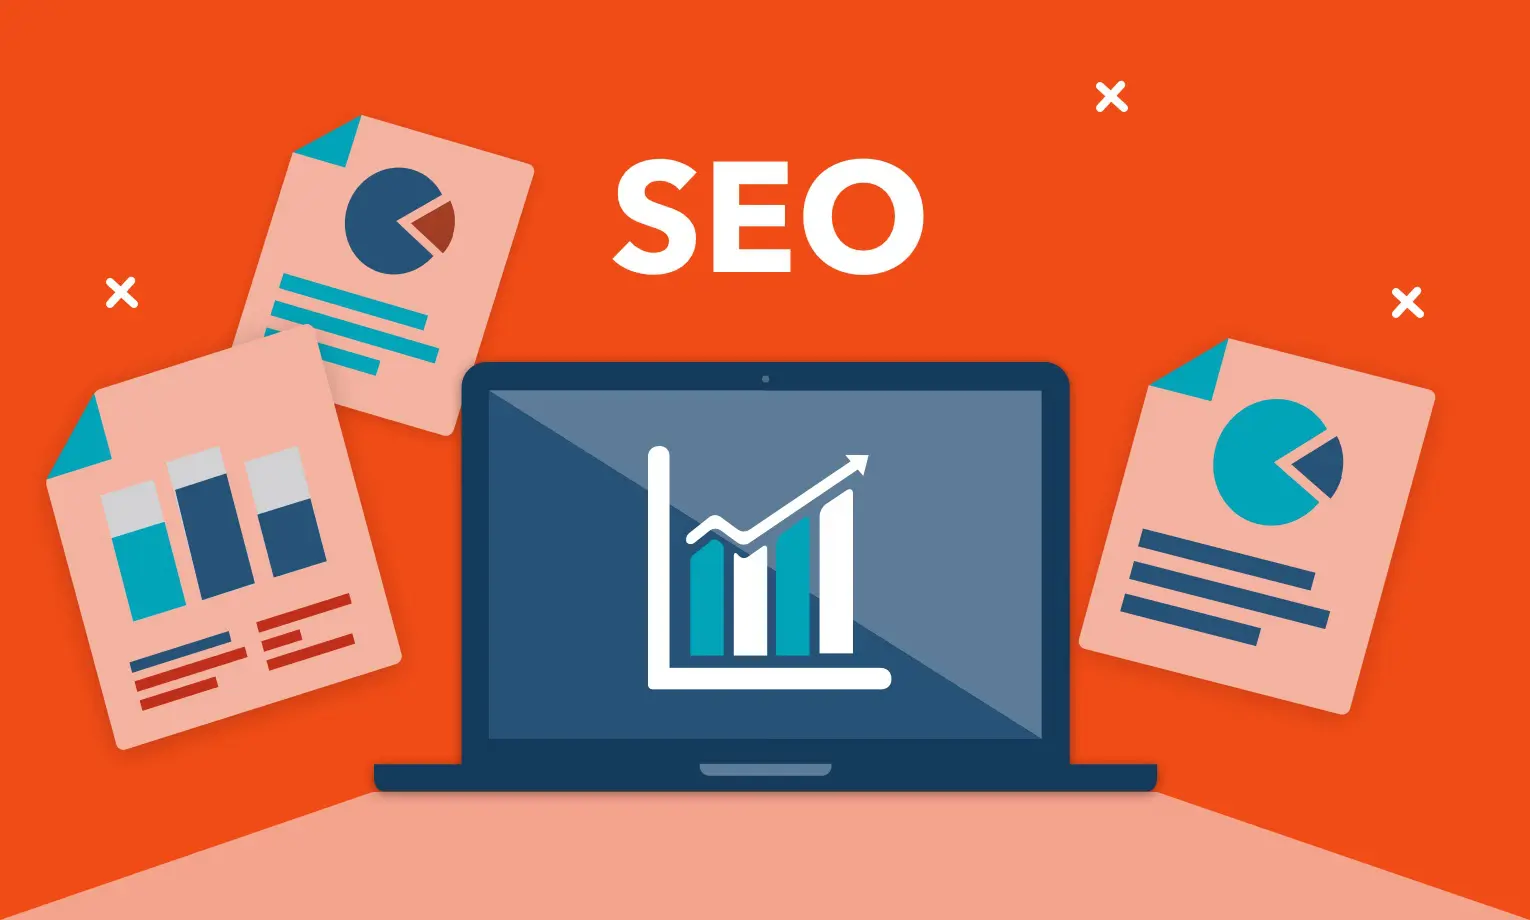 Boost Your Rankings in the Search Engine with Lawyer SEO